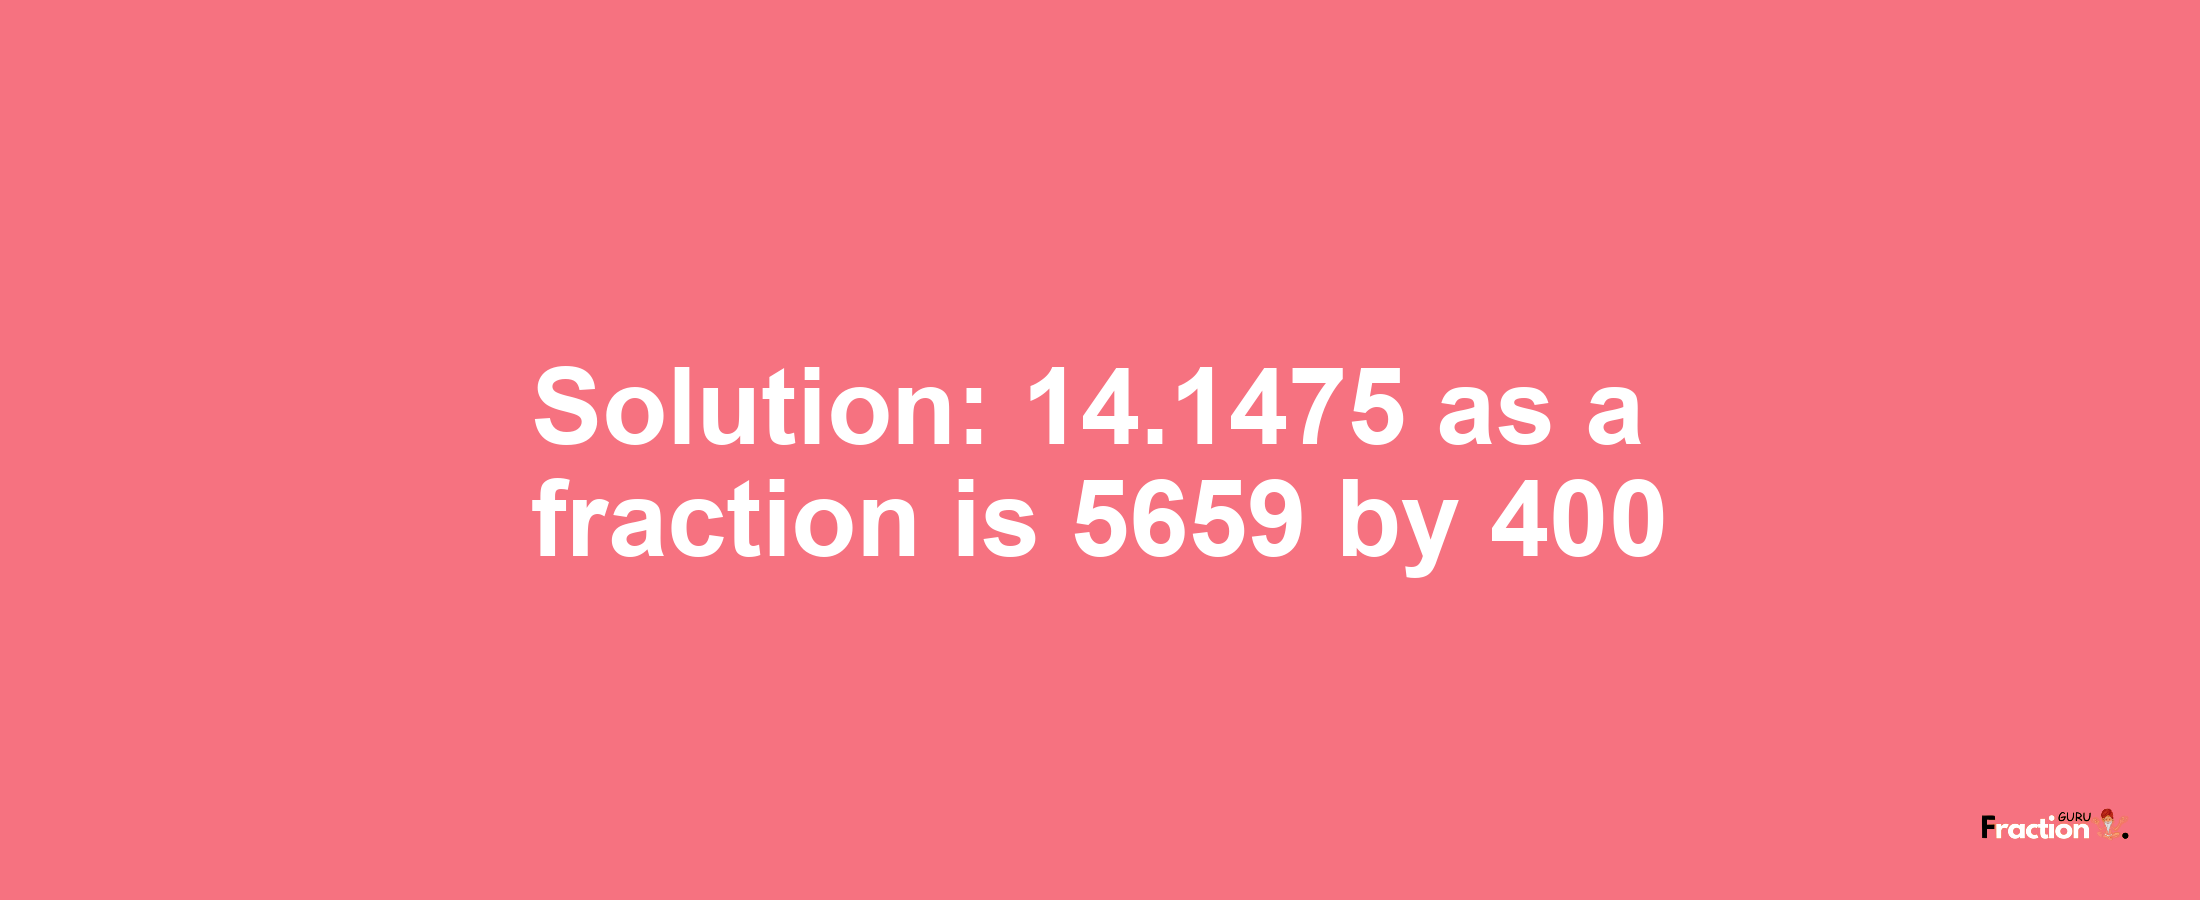 Solution:14.1475 as a fraction is 5659/400